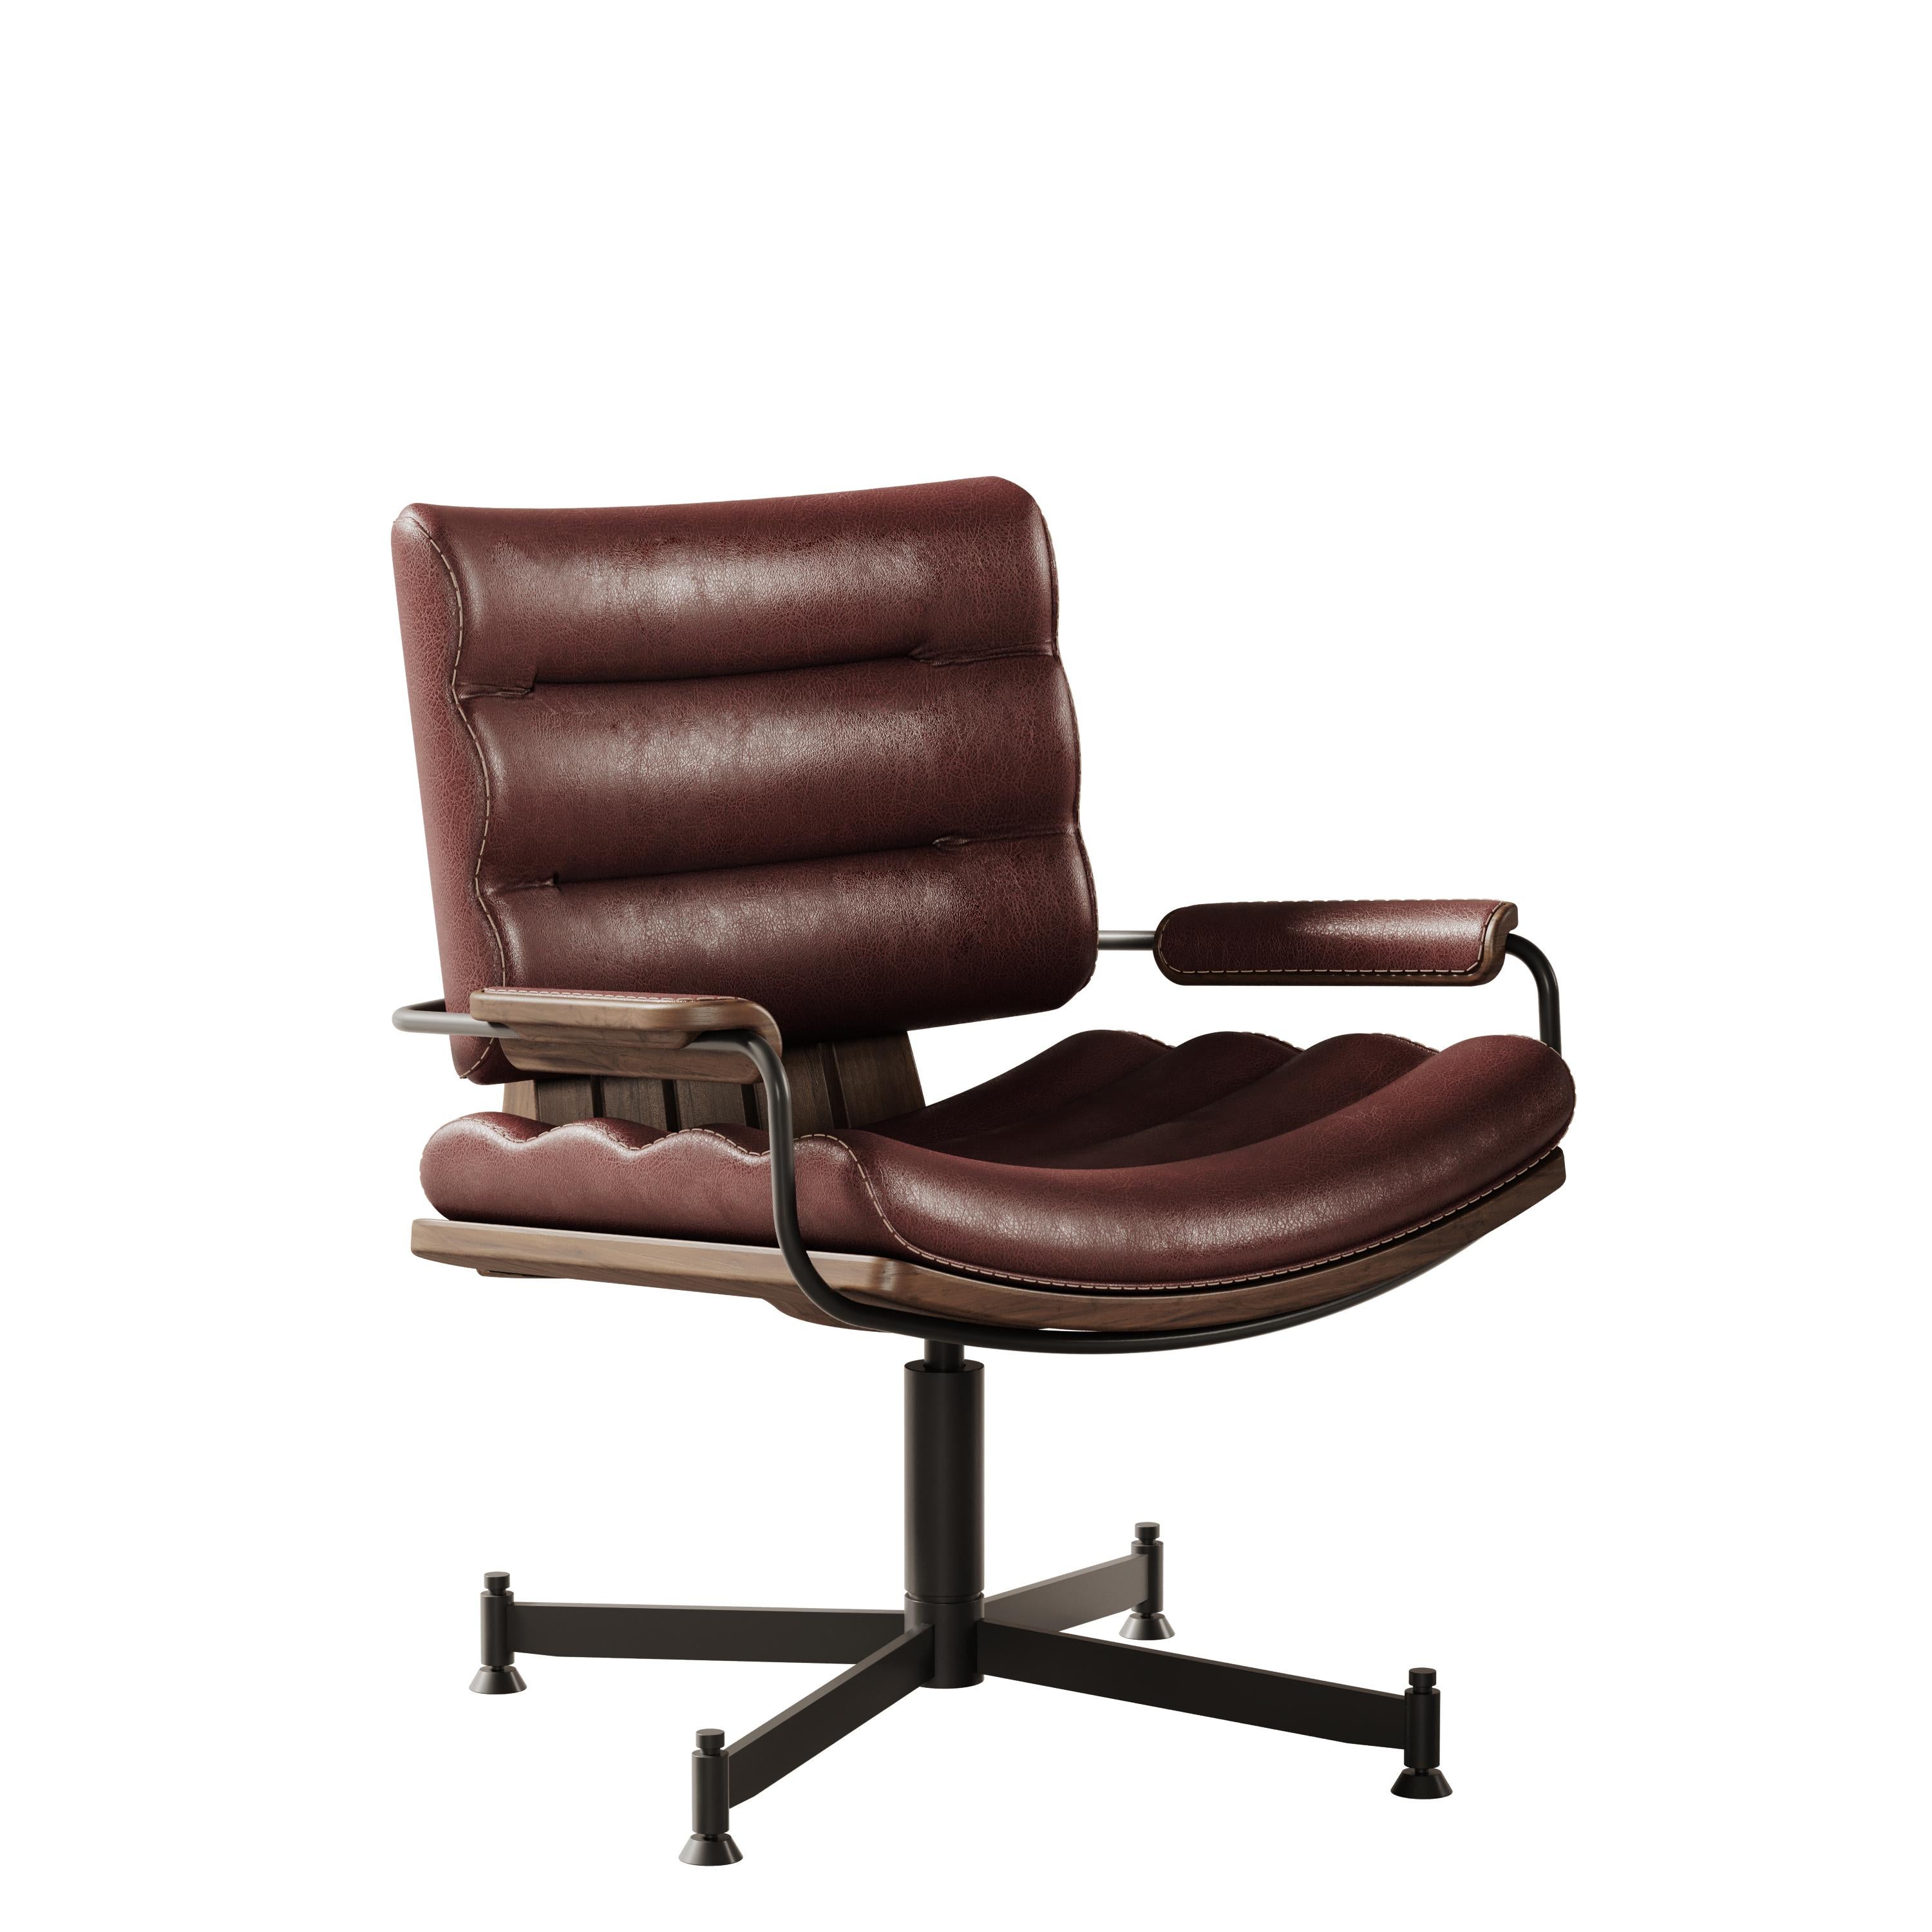 Designed for meaningful meetings and crucial decisions making, the Thomas Office Chair tributes Thomas Brassey. Brassey was a prestigious member of the privileged Brooks' Gentlemen Club, he was also a British Liberal politician and Governor of